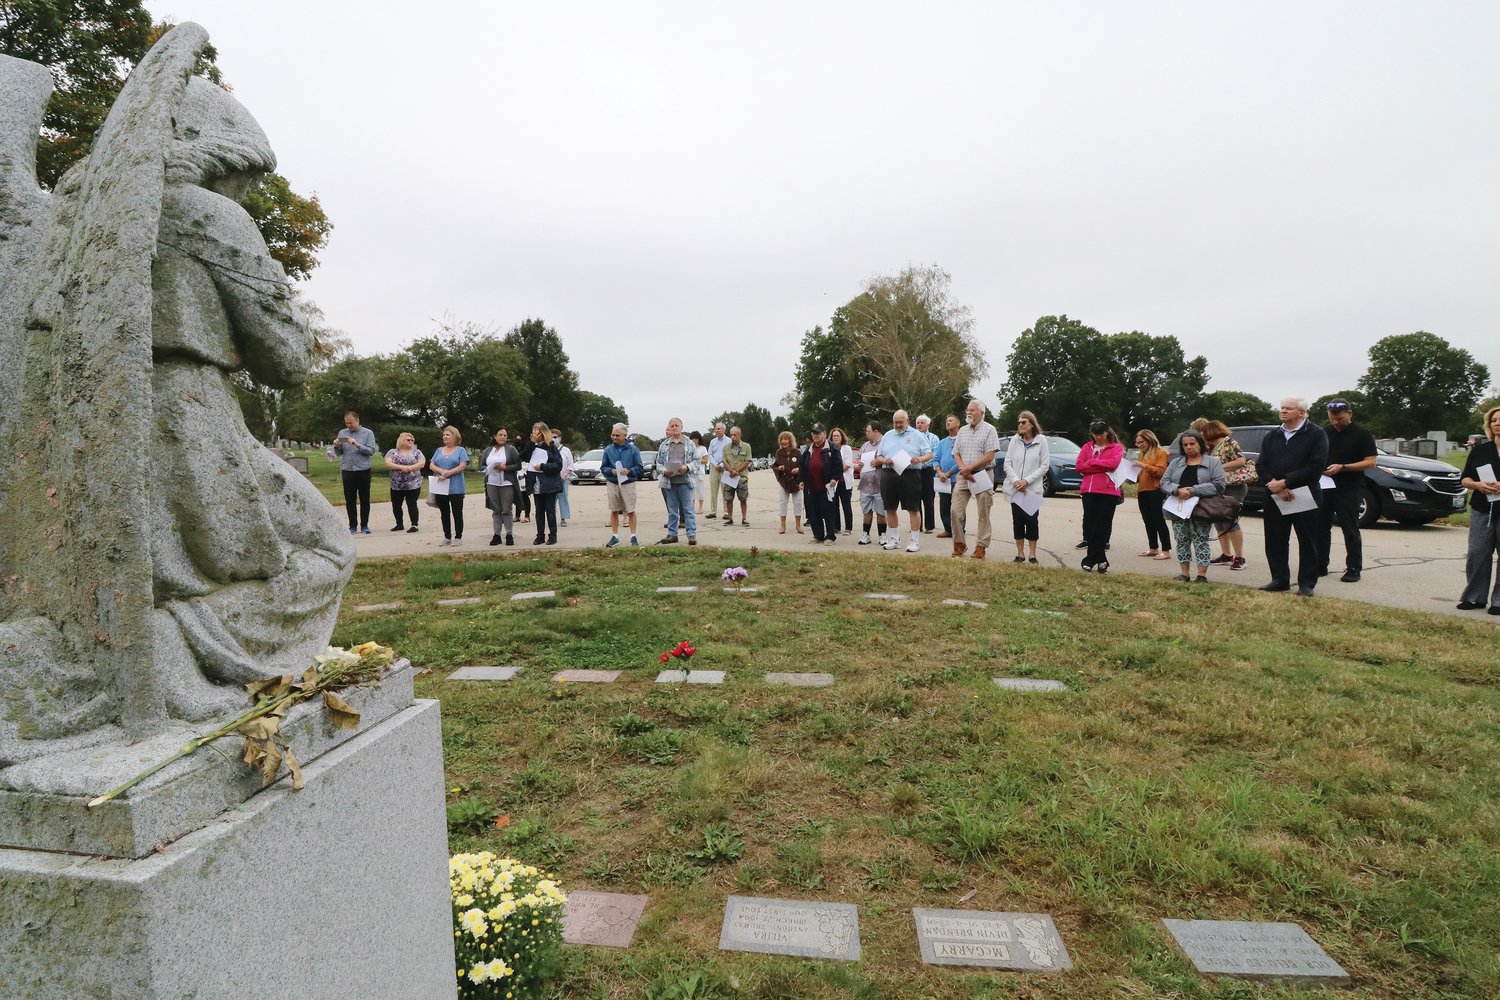 The National Day of Remembrance for aborted children, and for all babies who have died due to miscarriage, stillbirth or illness, took place on Saturday, Sept. 18, at the Gate of Heaven Cemetery, Guardian Angel Statue burial site.